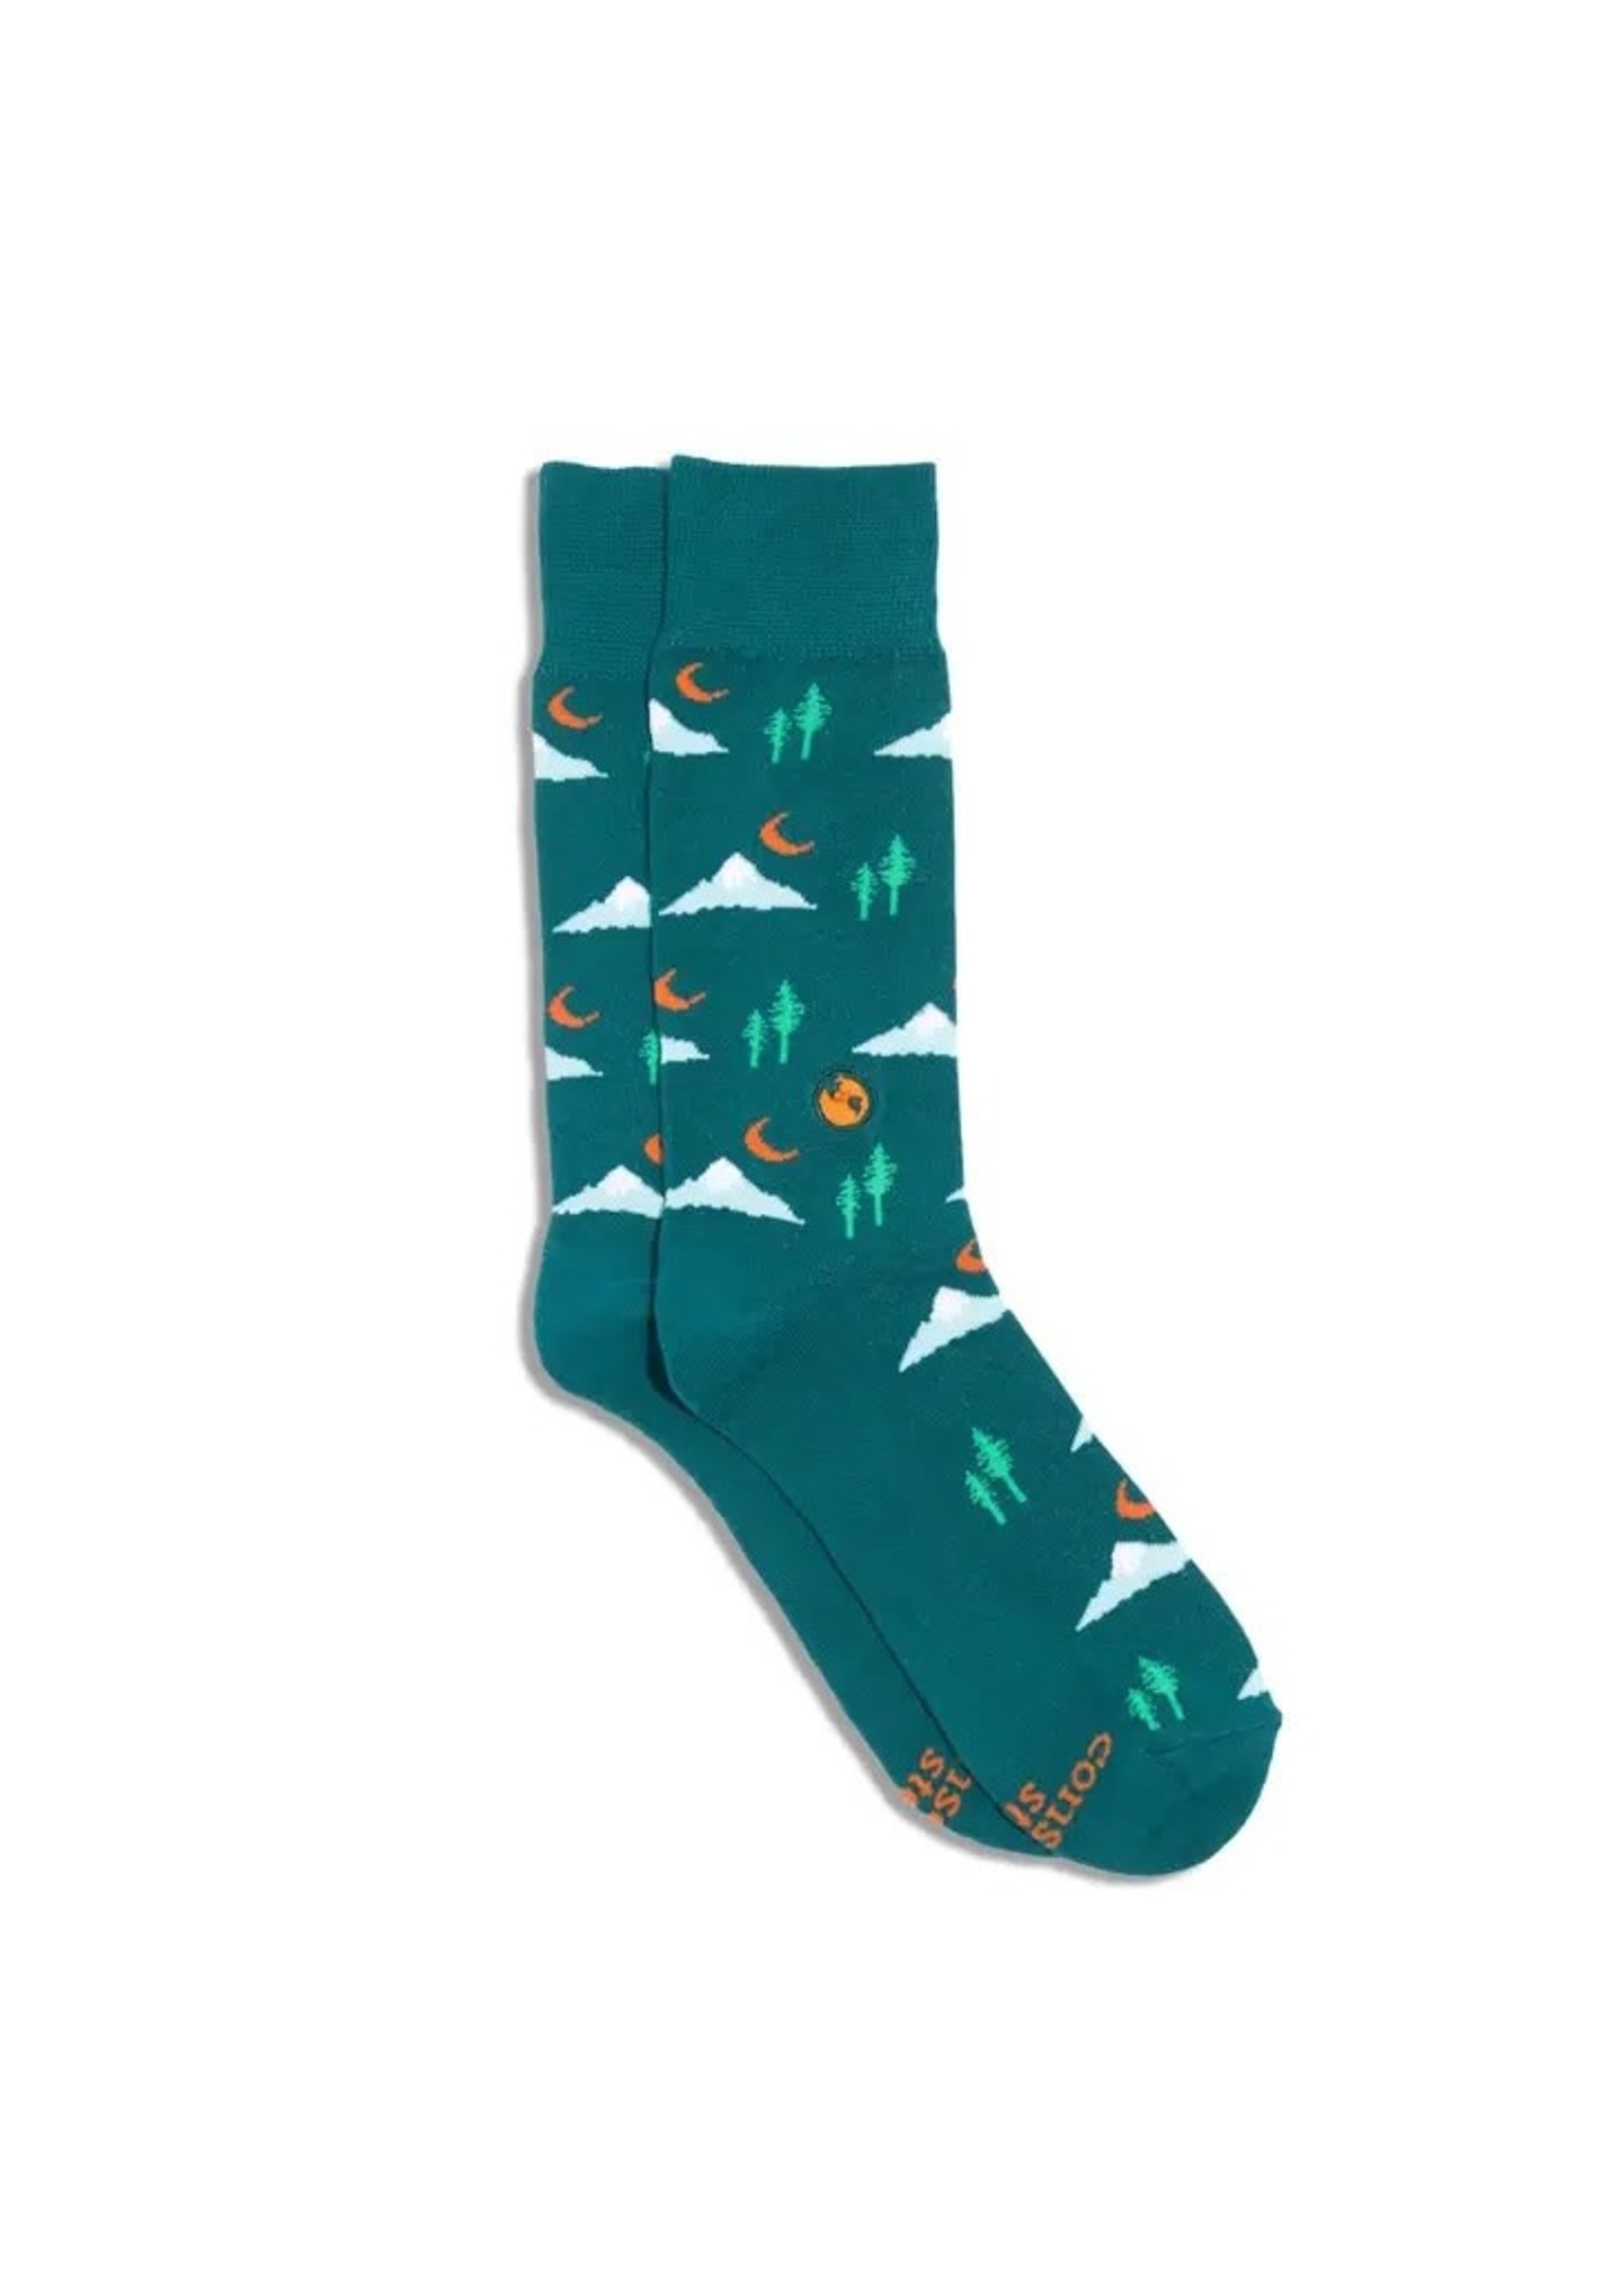 Socks - Protect our Planet Green Mountain